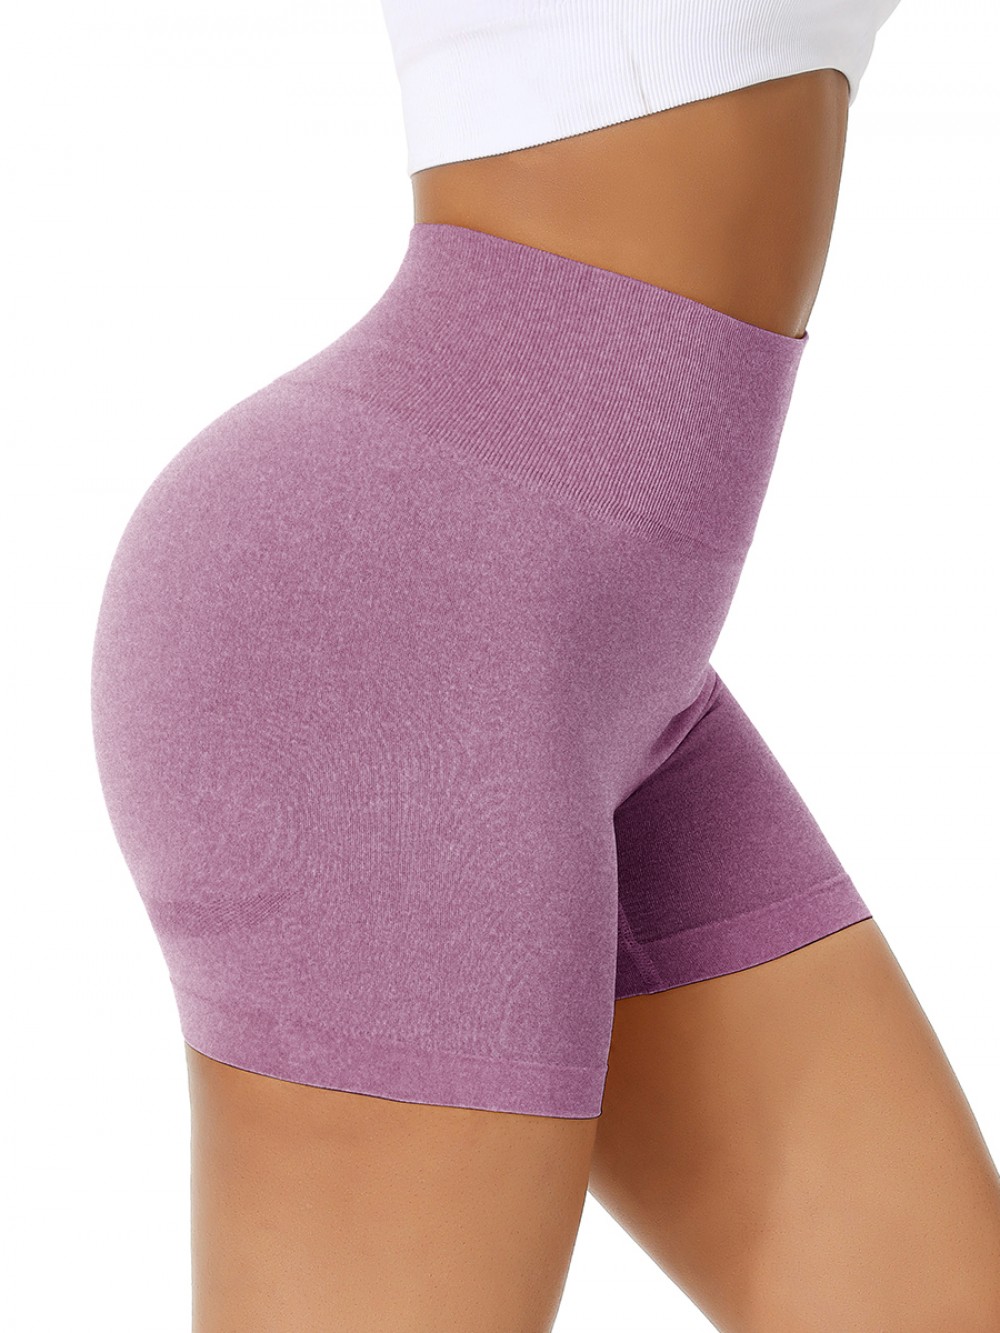 Light Purple Short Athletic Shorts Solid Color High Rise For Workout